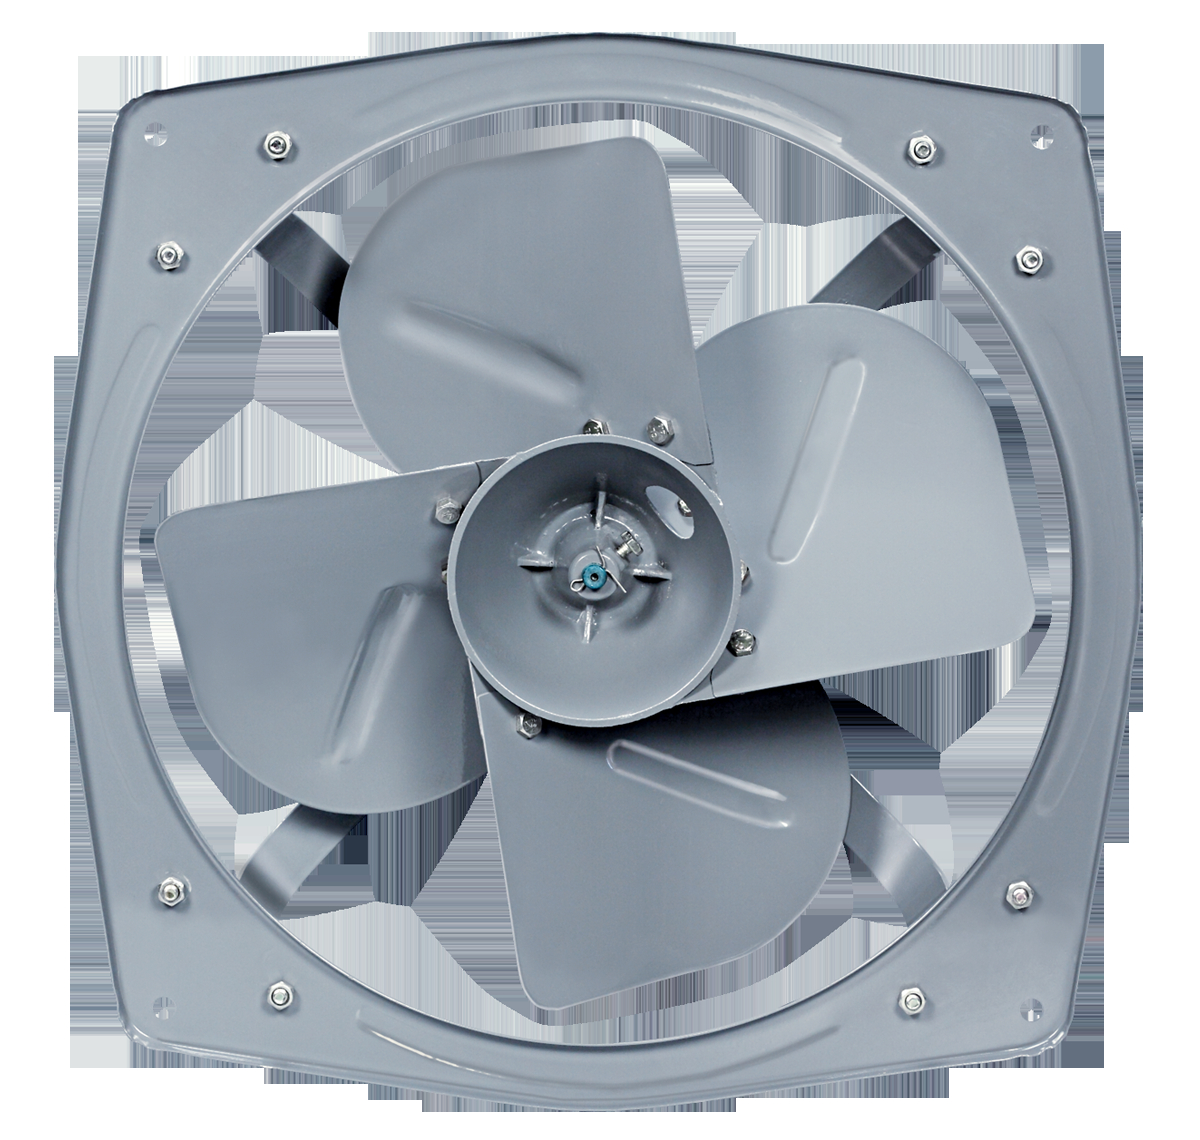 Havells Heavy Duty Exhaust Fan Turboforce 1400 Rpm Havells with regard to dimensions 1200 X 1140